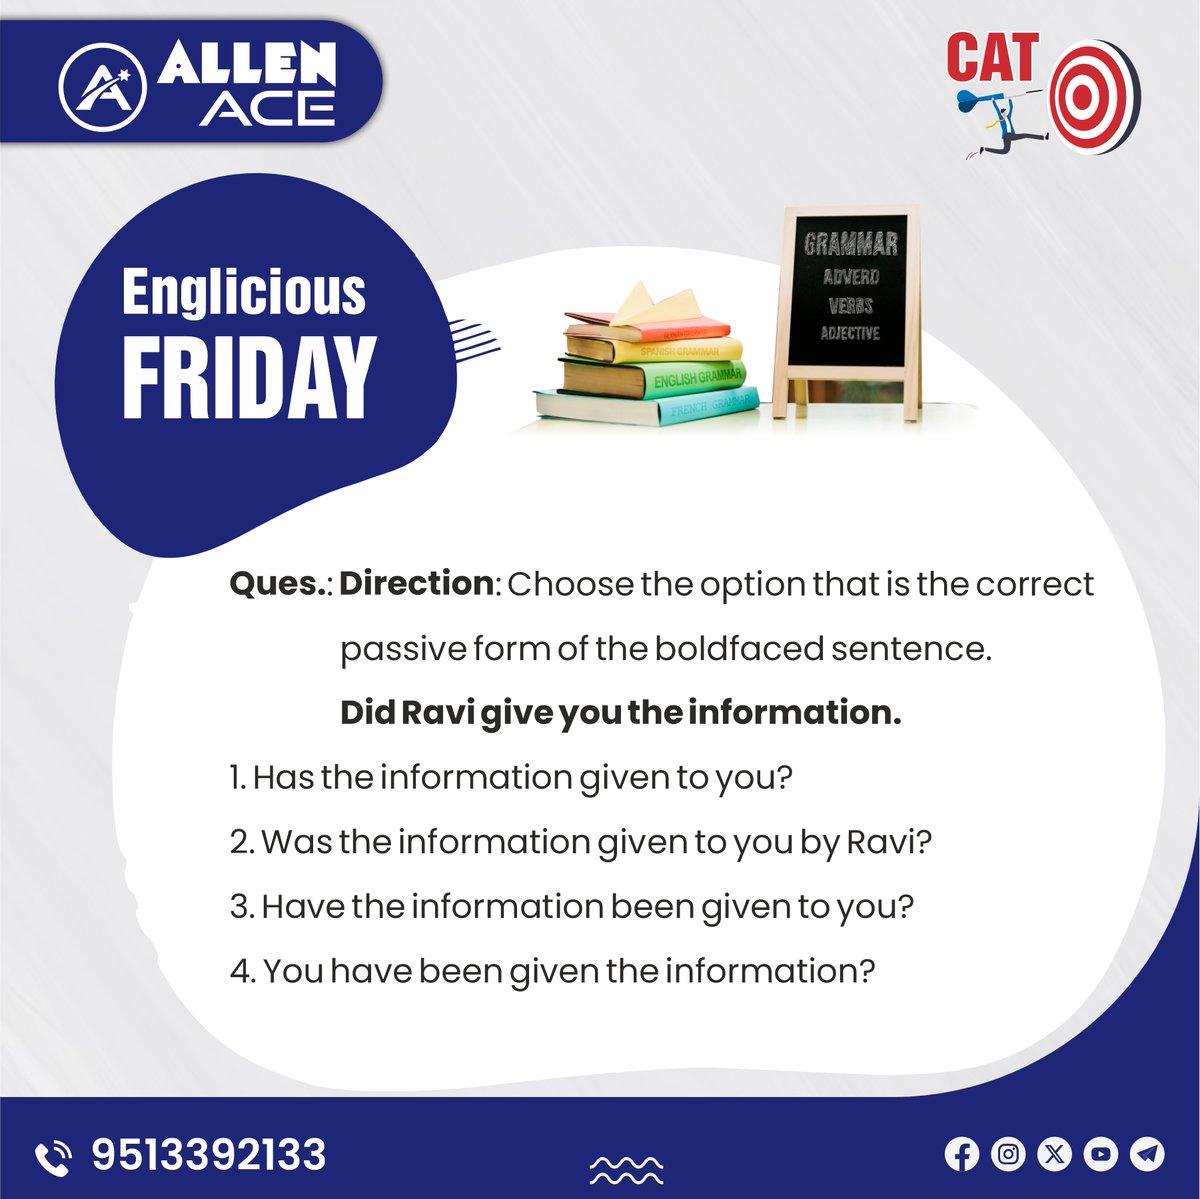 👉 Do you want to take your #Verbal skills for #CAT to the next level?

👆 Follow our posts on #EngliciousFriday

#Englishgrammar #vocabulary #Readingcomprehension #oneword #VARC #basicsofgrammer #onewordsubstitution #idioms #phrases #CAT #CAT2023 #ALLENACE #MBA #BSCHOOLS #iim